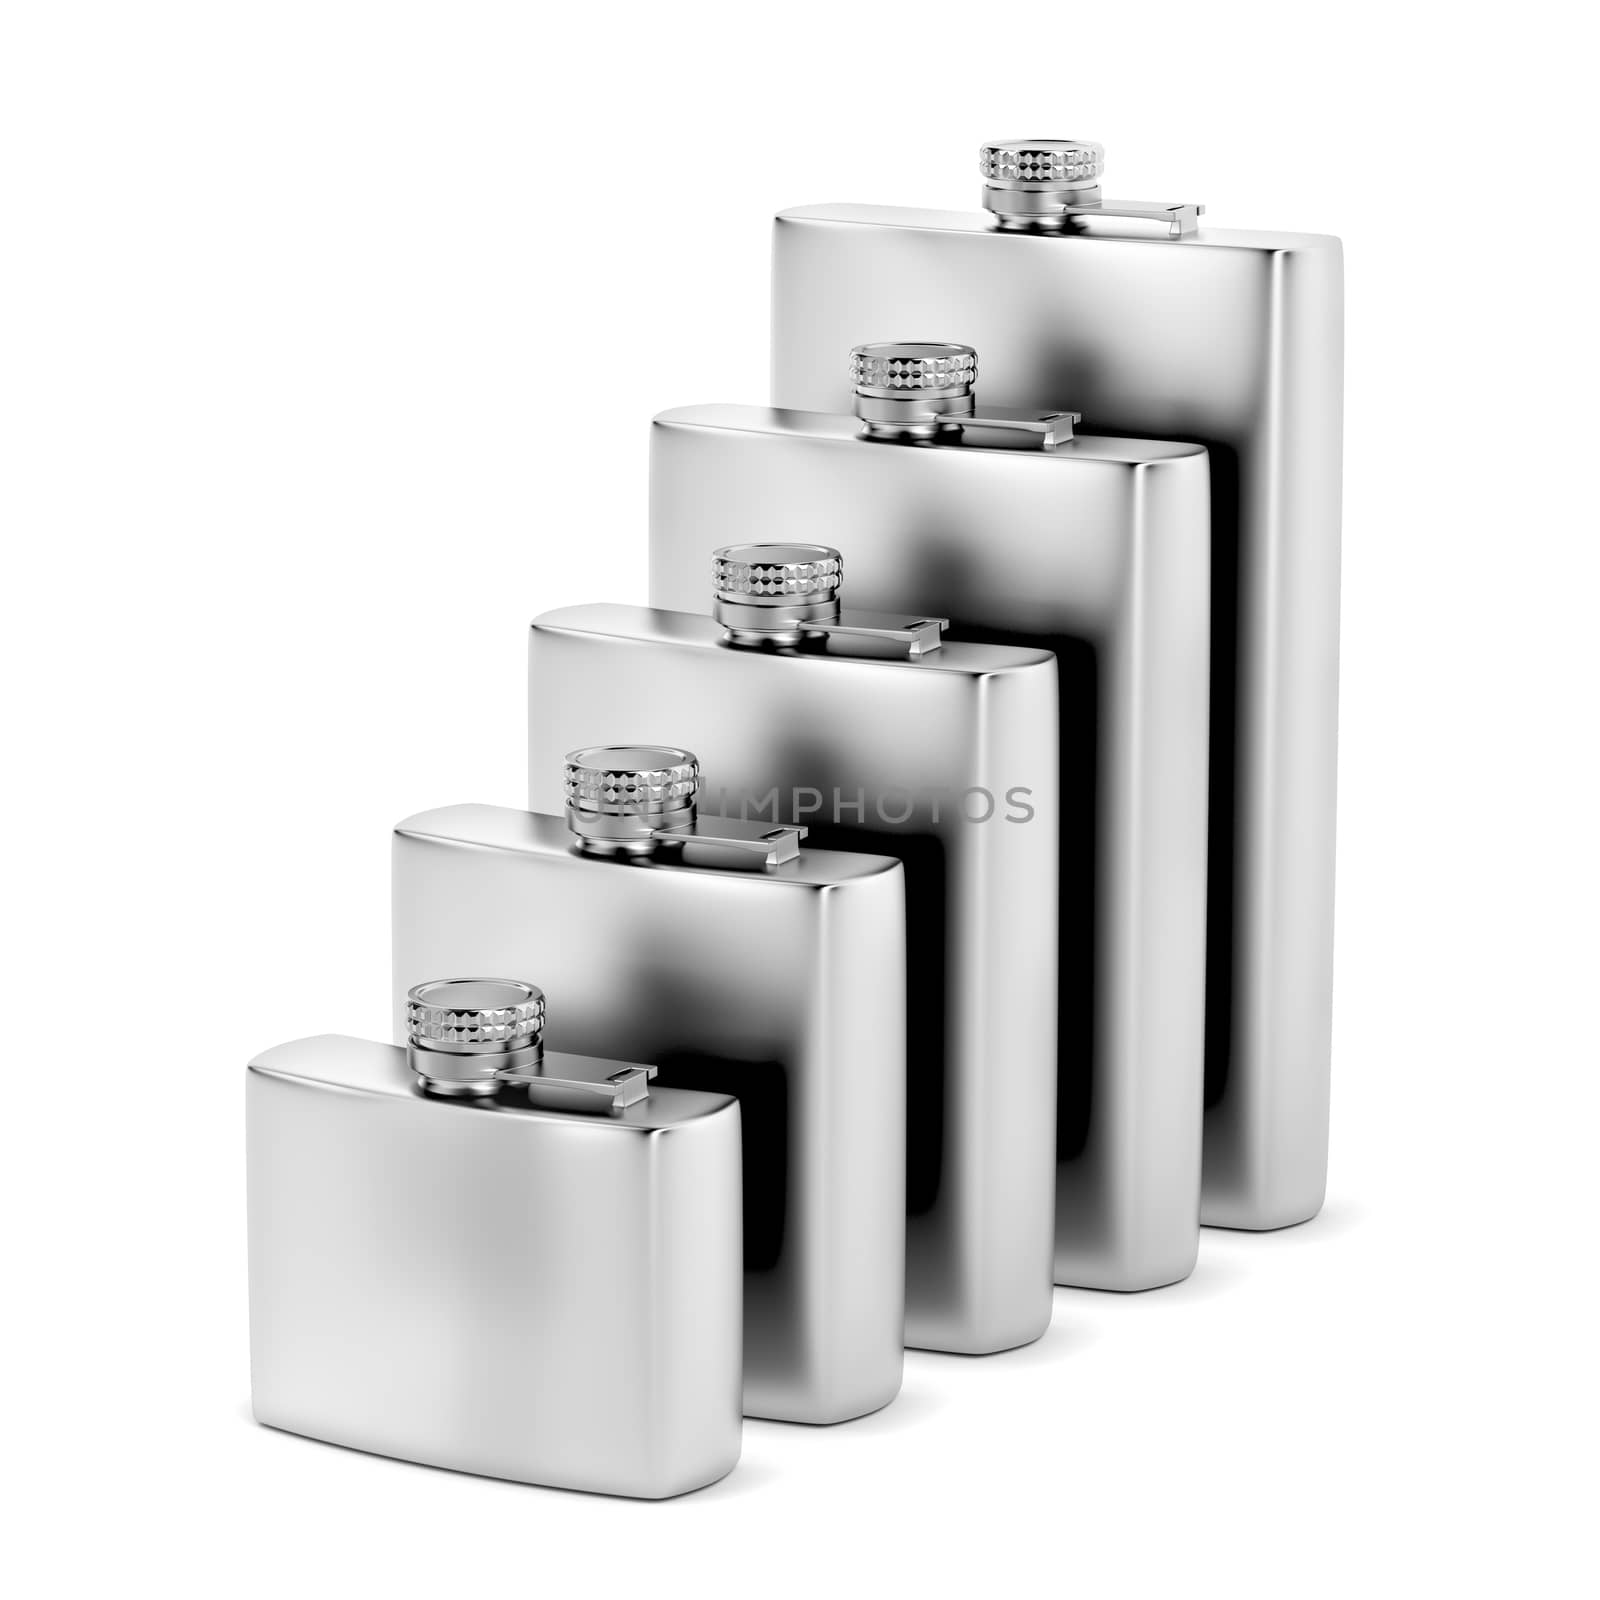 Group of hip flasks by magraphics